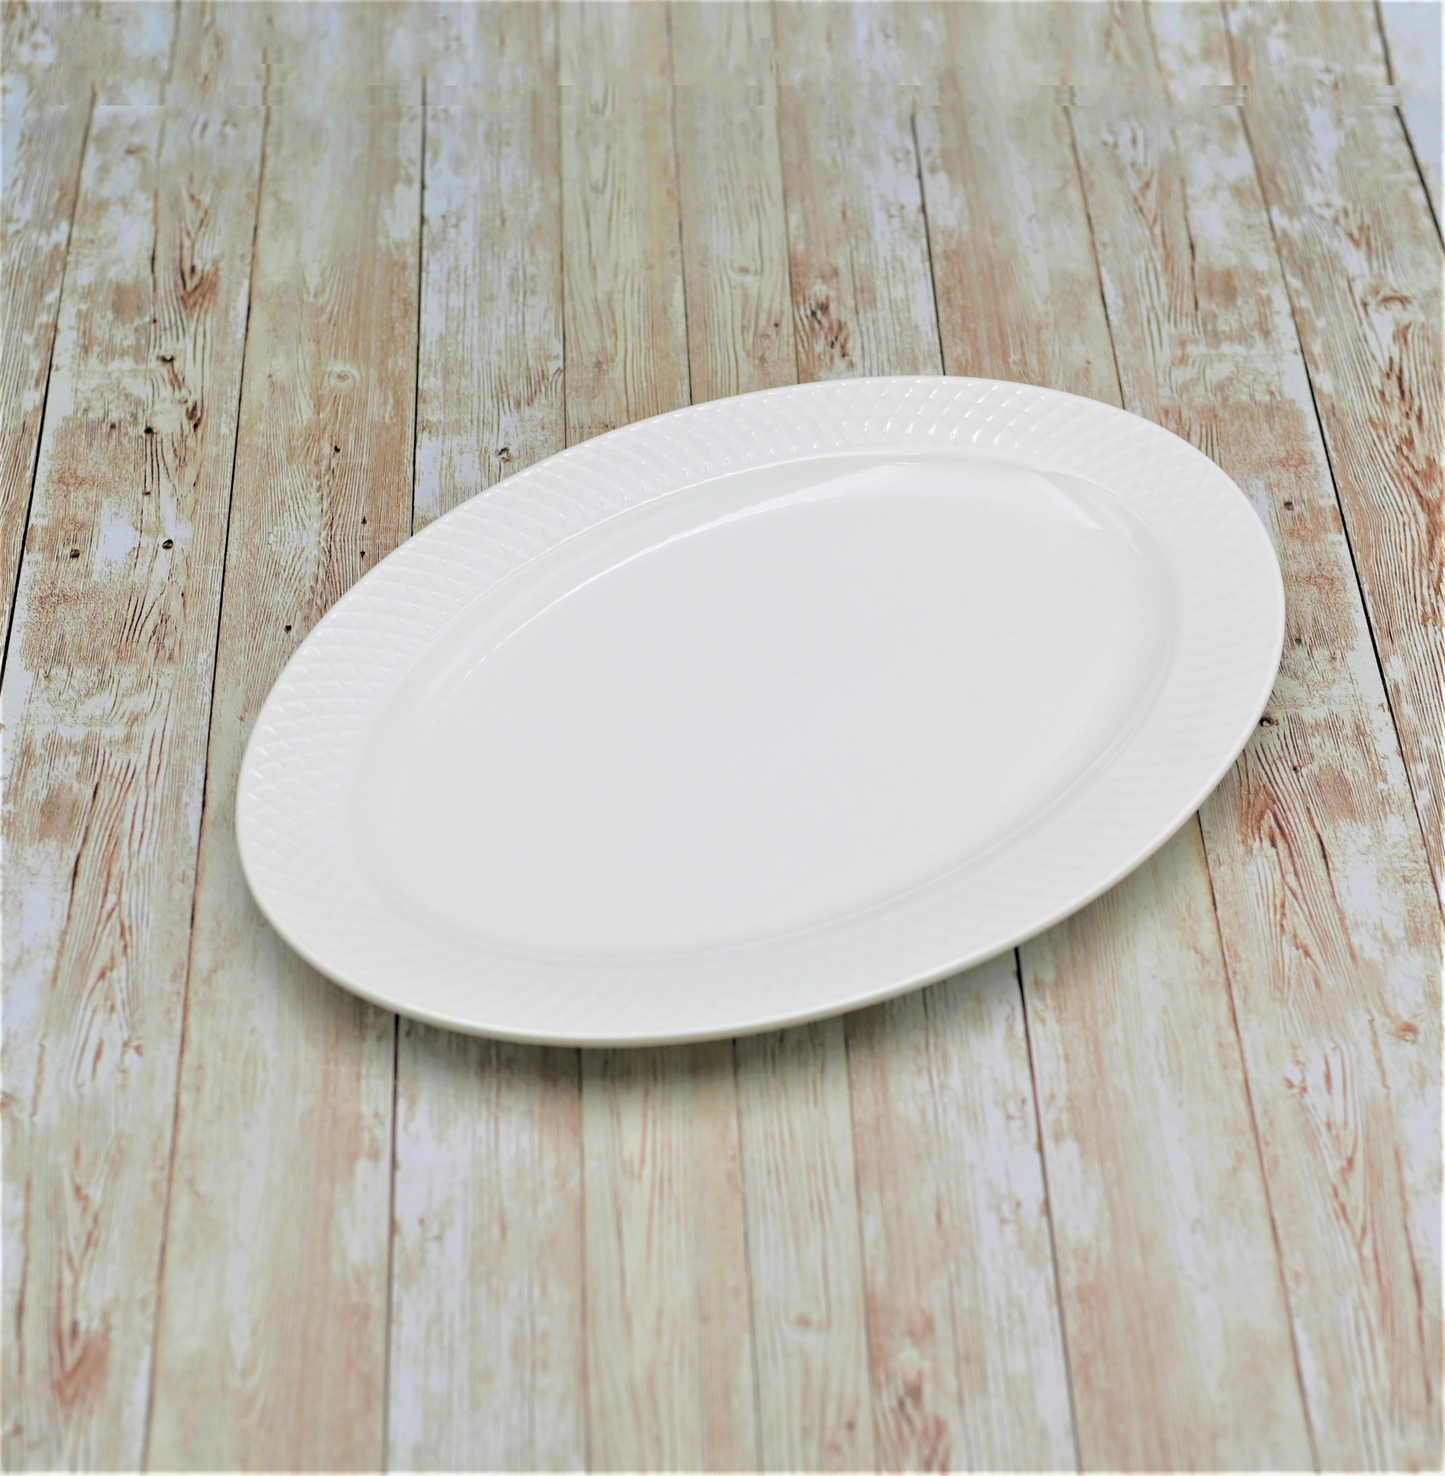 Wilmax Fine Porcelain White Oval Platter With Embossed Wide Rim  14" X 10" |In Gift Box WL-880103/1C